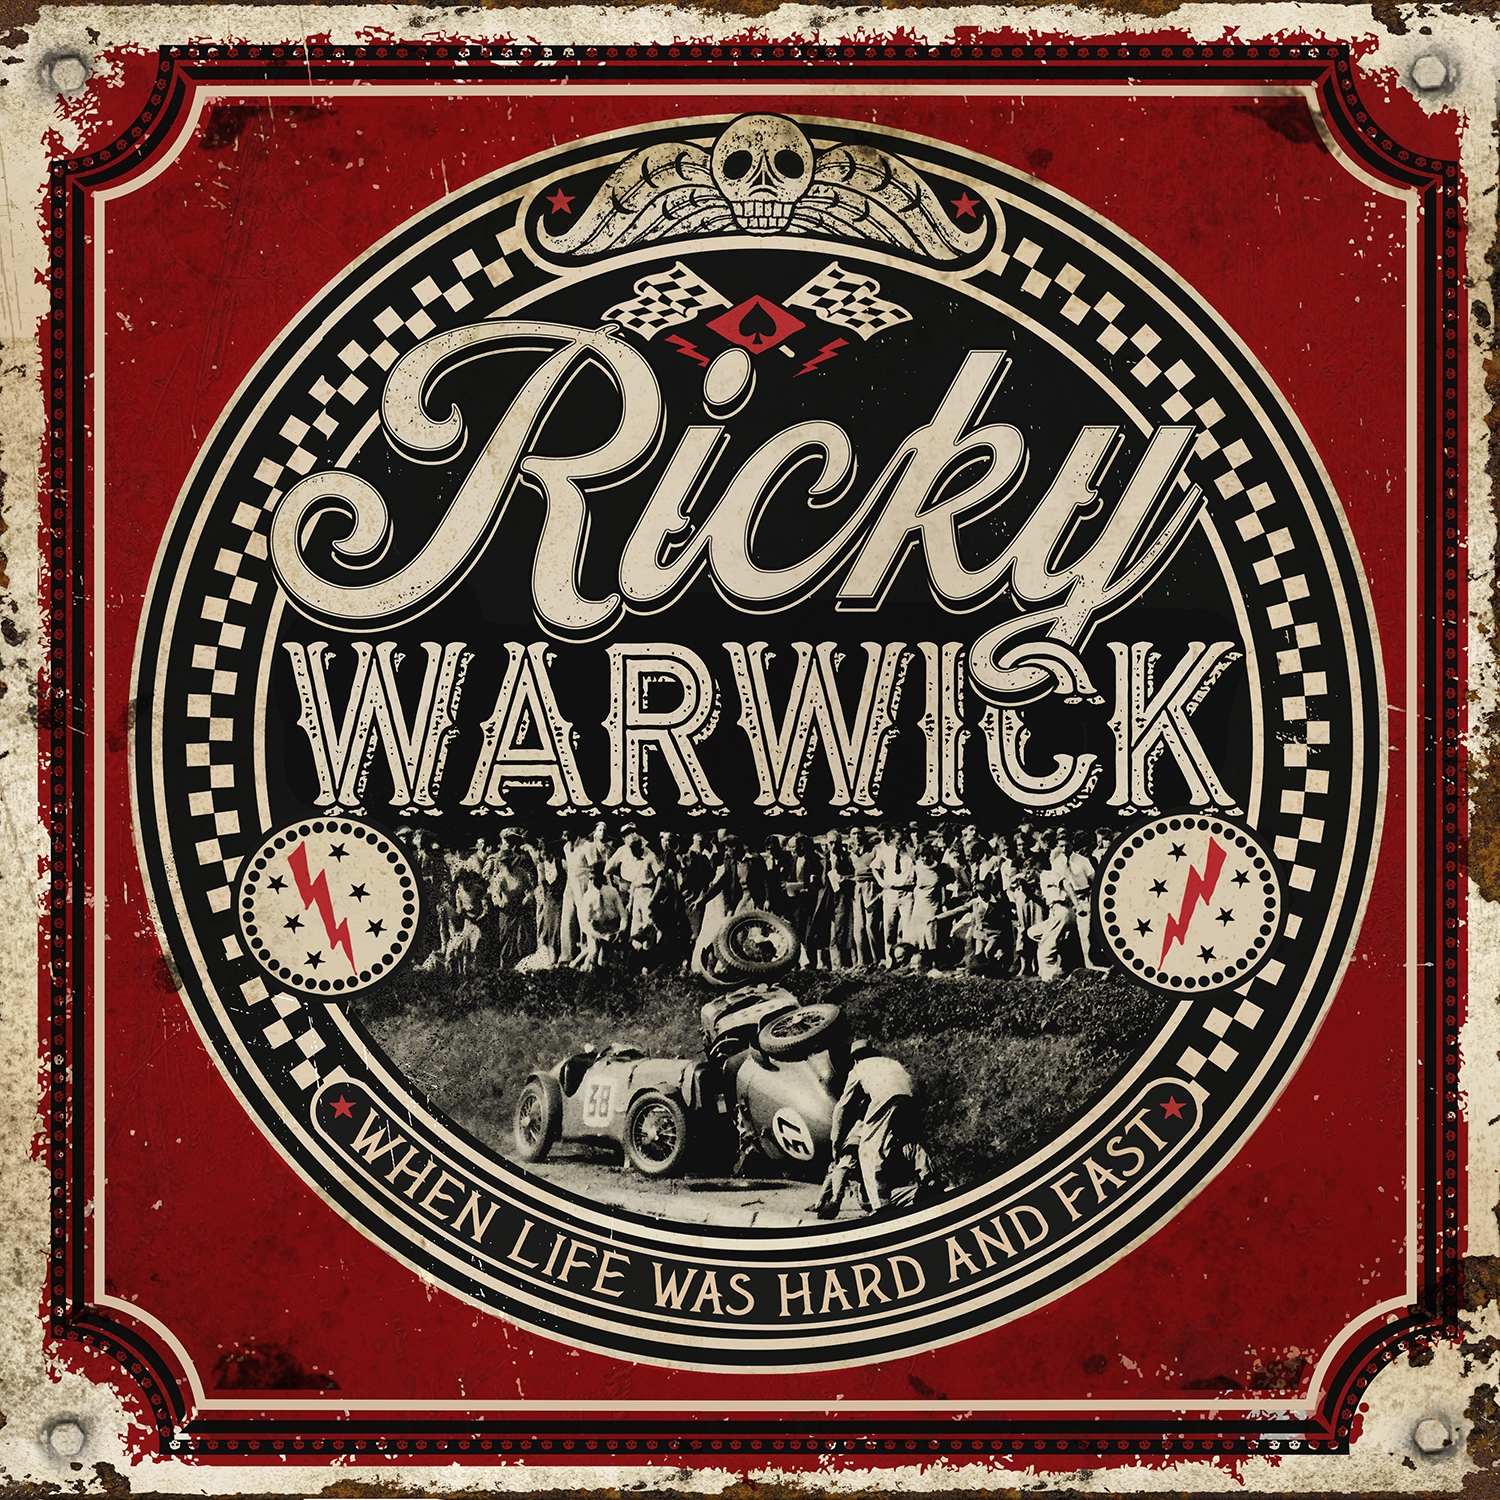 Ricky Warwick (IRE) – When Life Was Hard & Fast